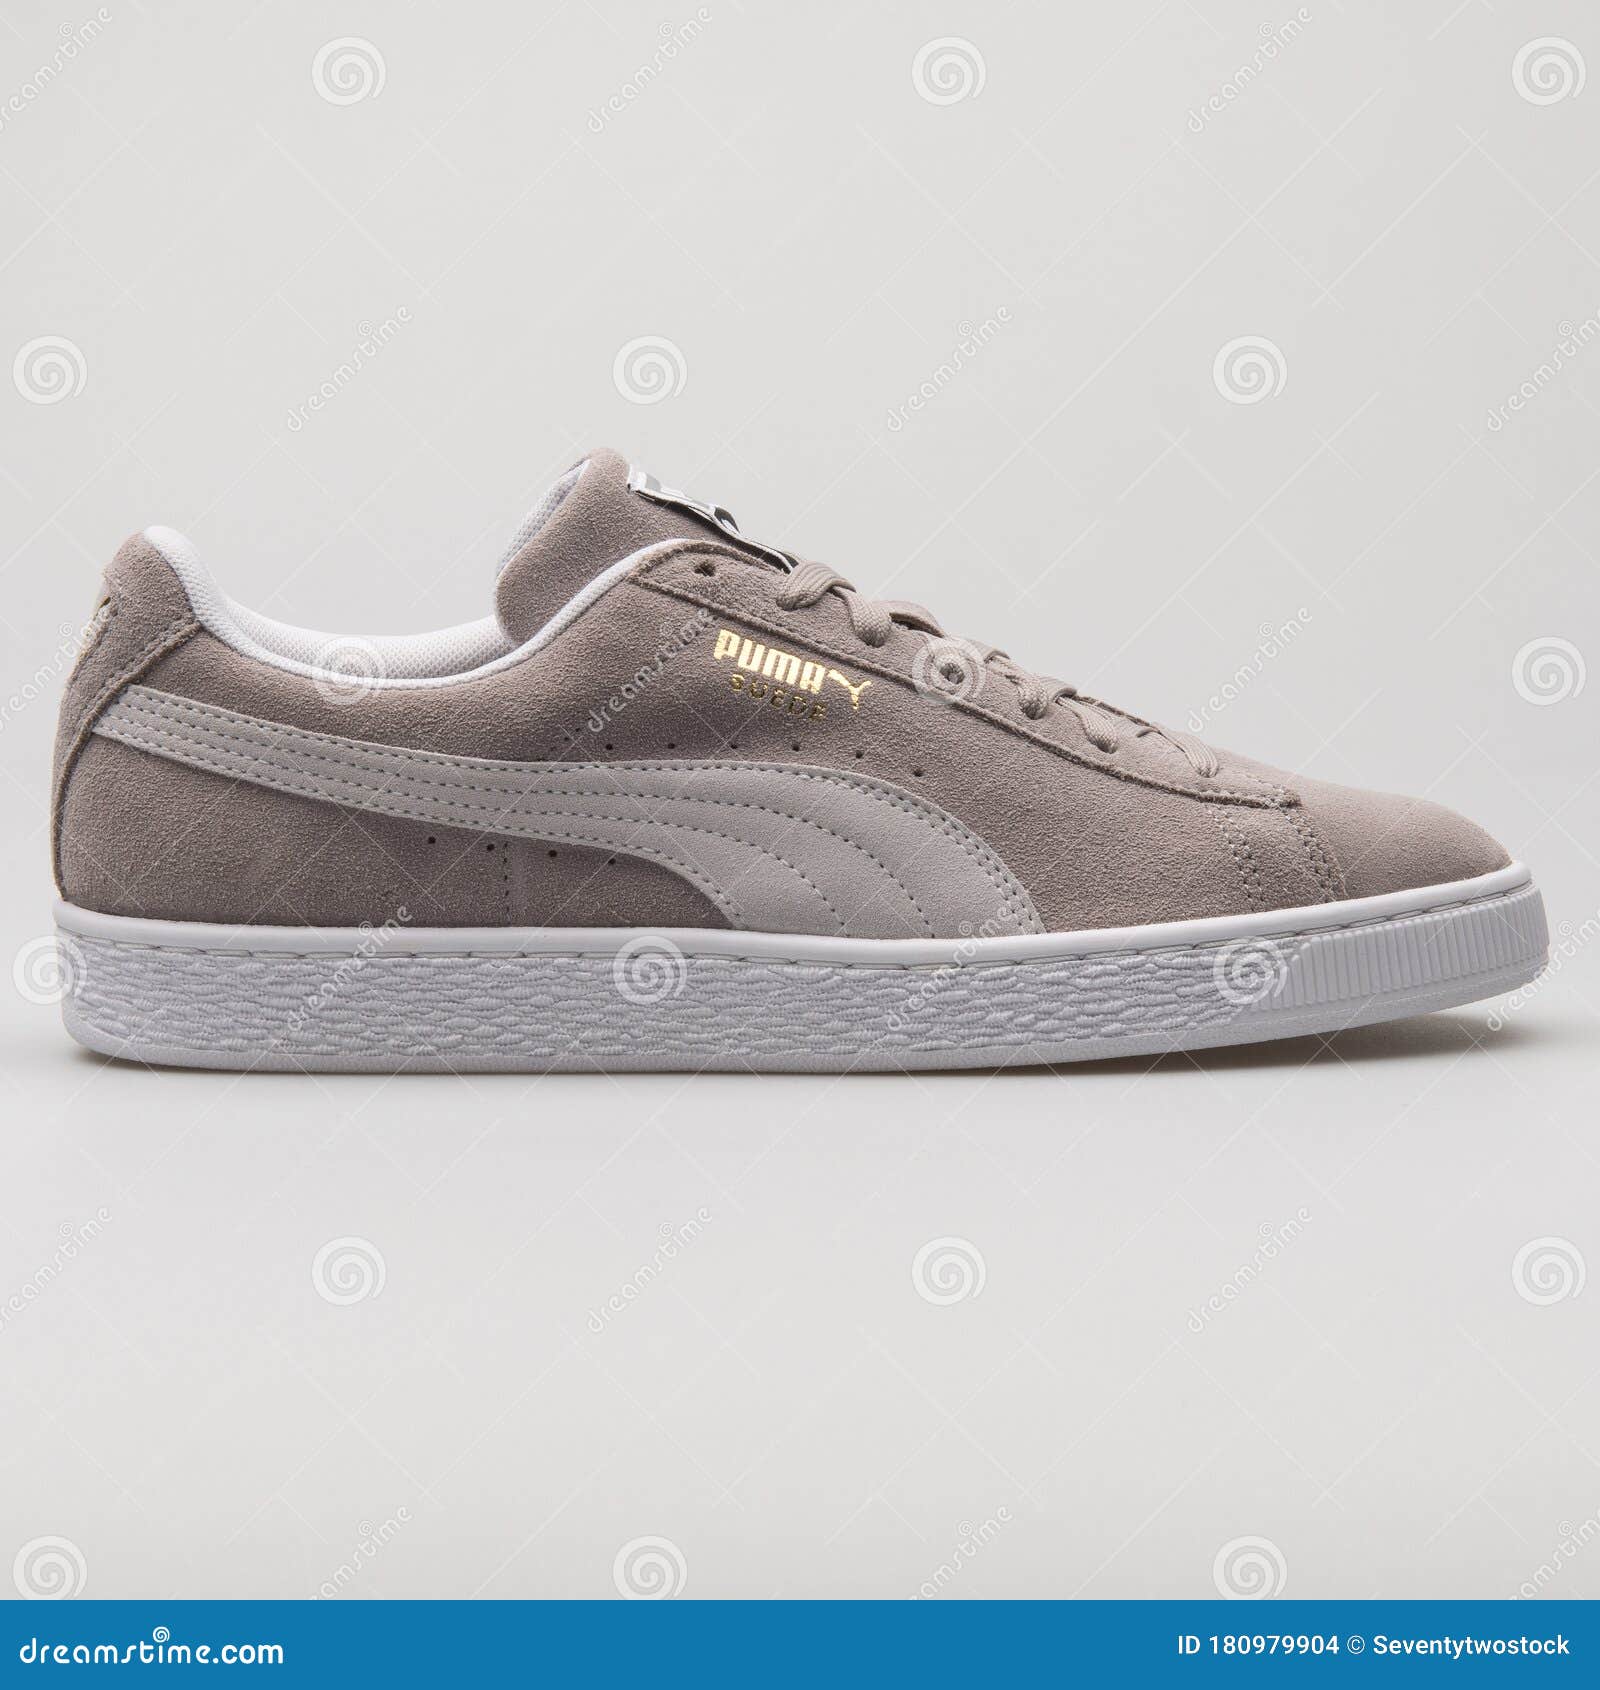 Puma Suede Classic Ash Grey And White Editorial Stock Image - Image of  grey, footwear: 180979904